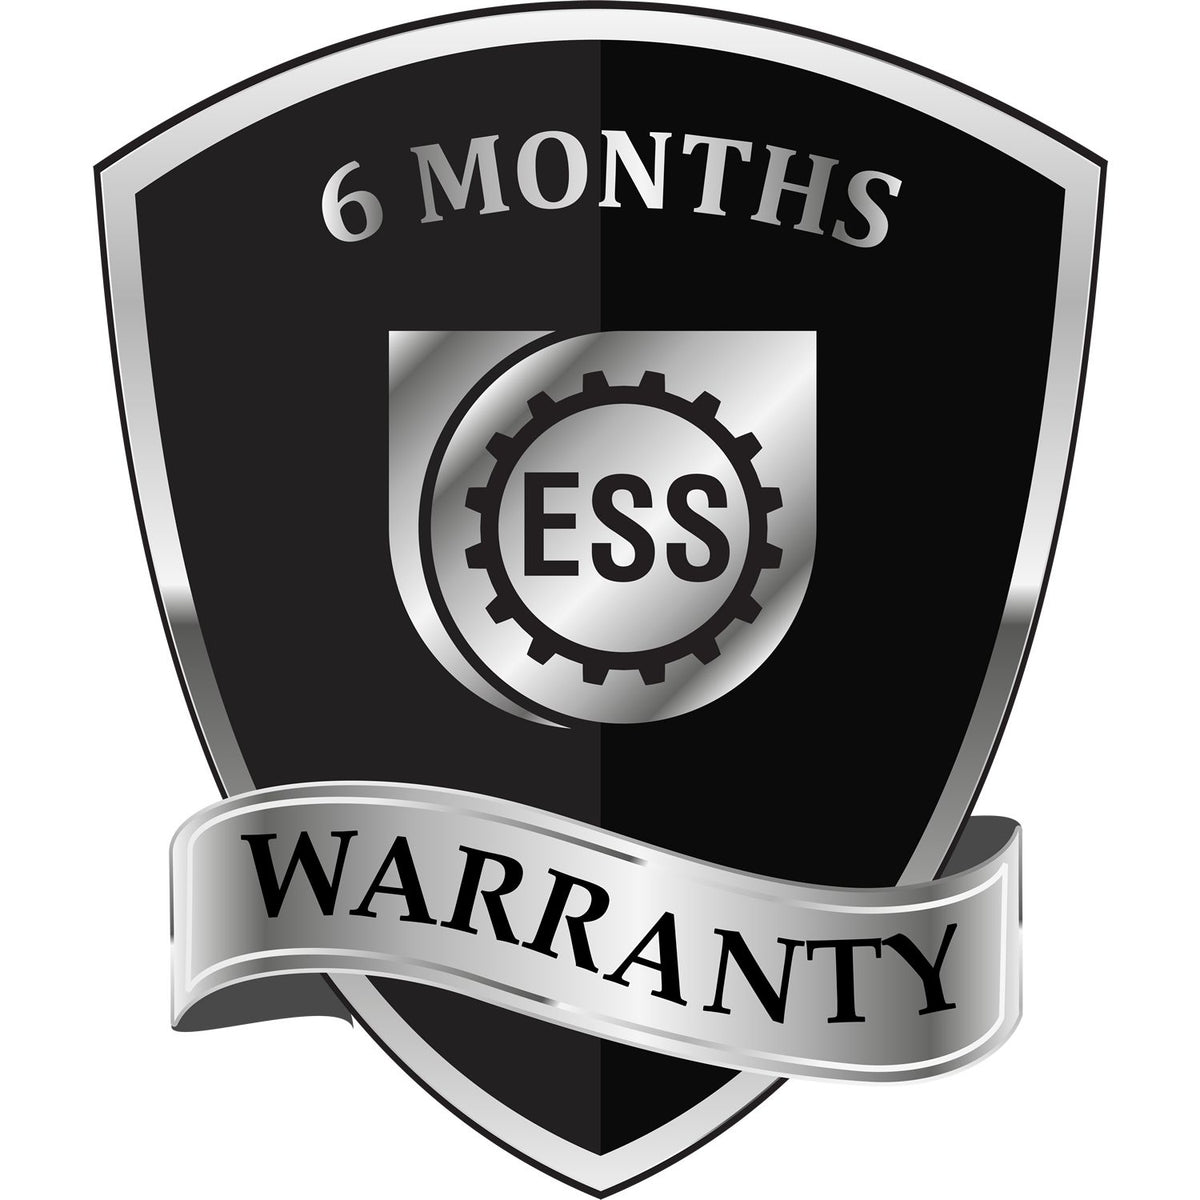 A badge or emblem showing a warranty icon for the Slim Pre-Inked Missouri Professional Engineer Seal Stamp